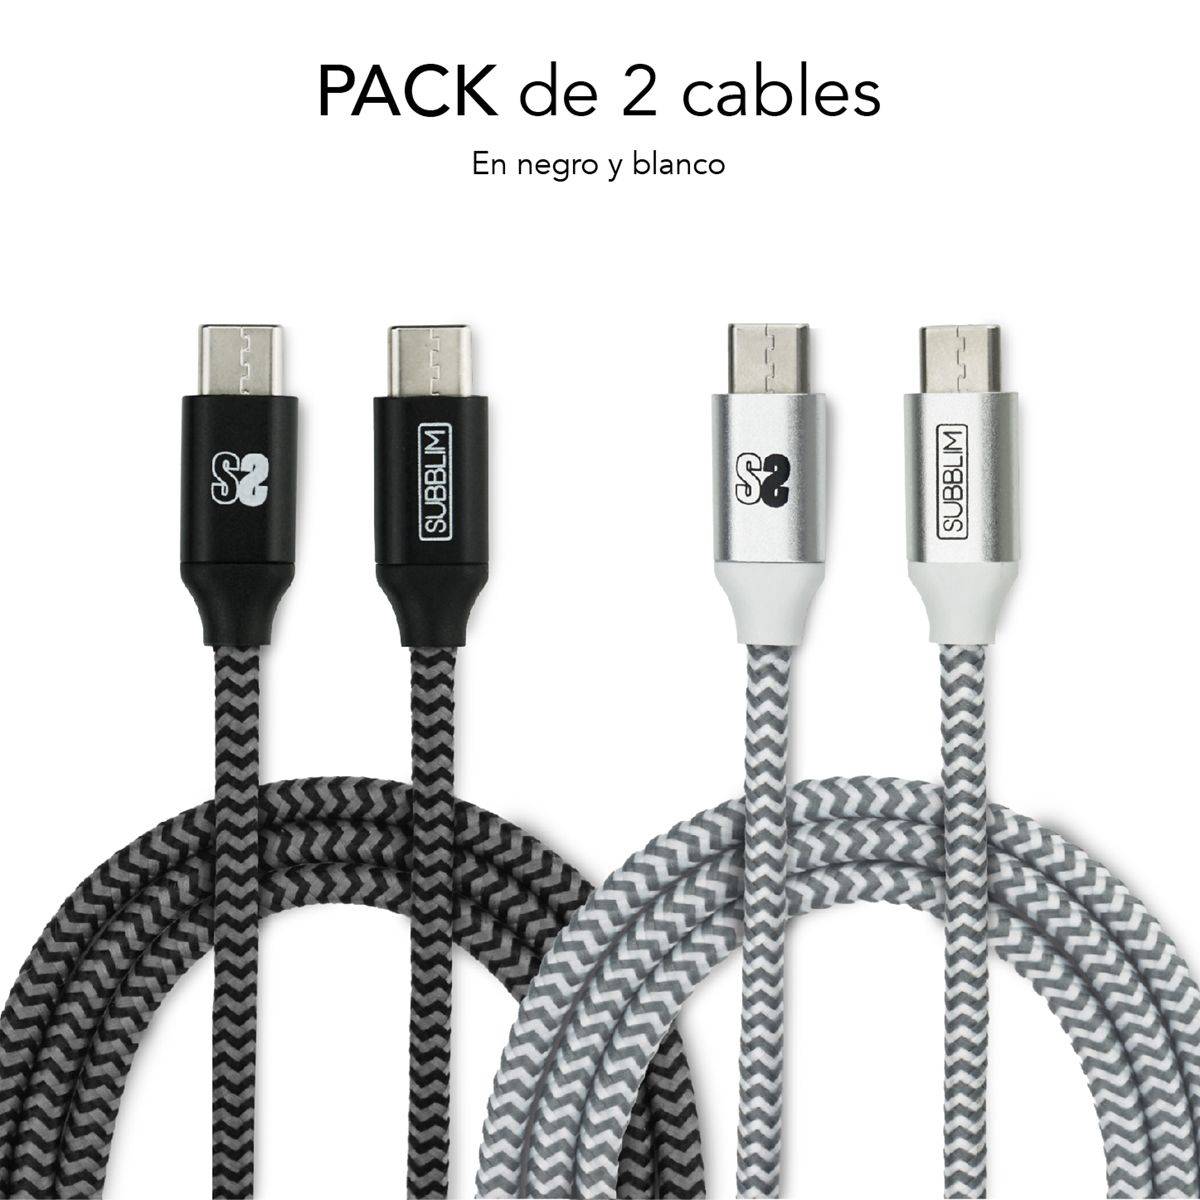 Ennegrecer Sudán embargo ✓ Pack 2 Cables USB Tipo C – USB Tipo C (3.0A) Black/Silver | Subblim